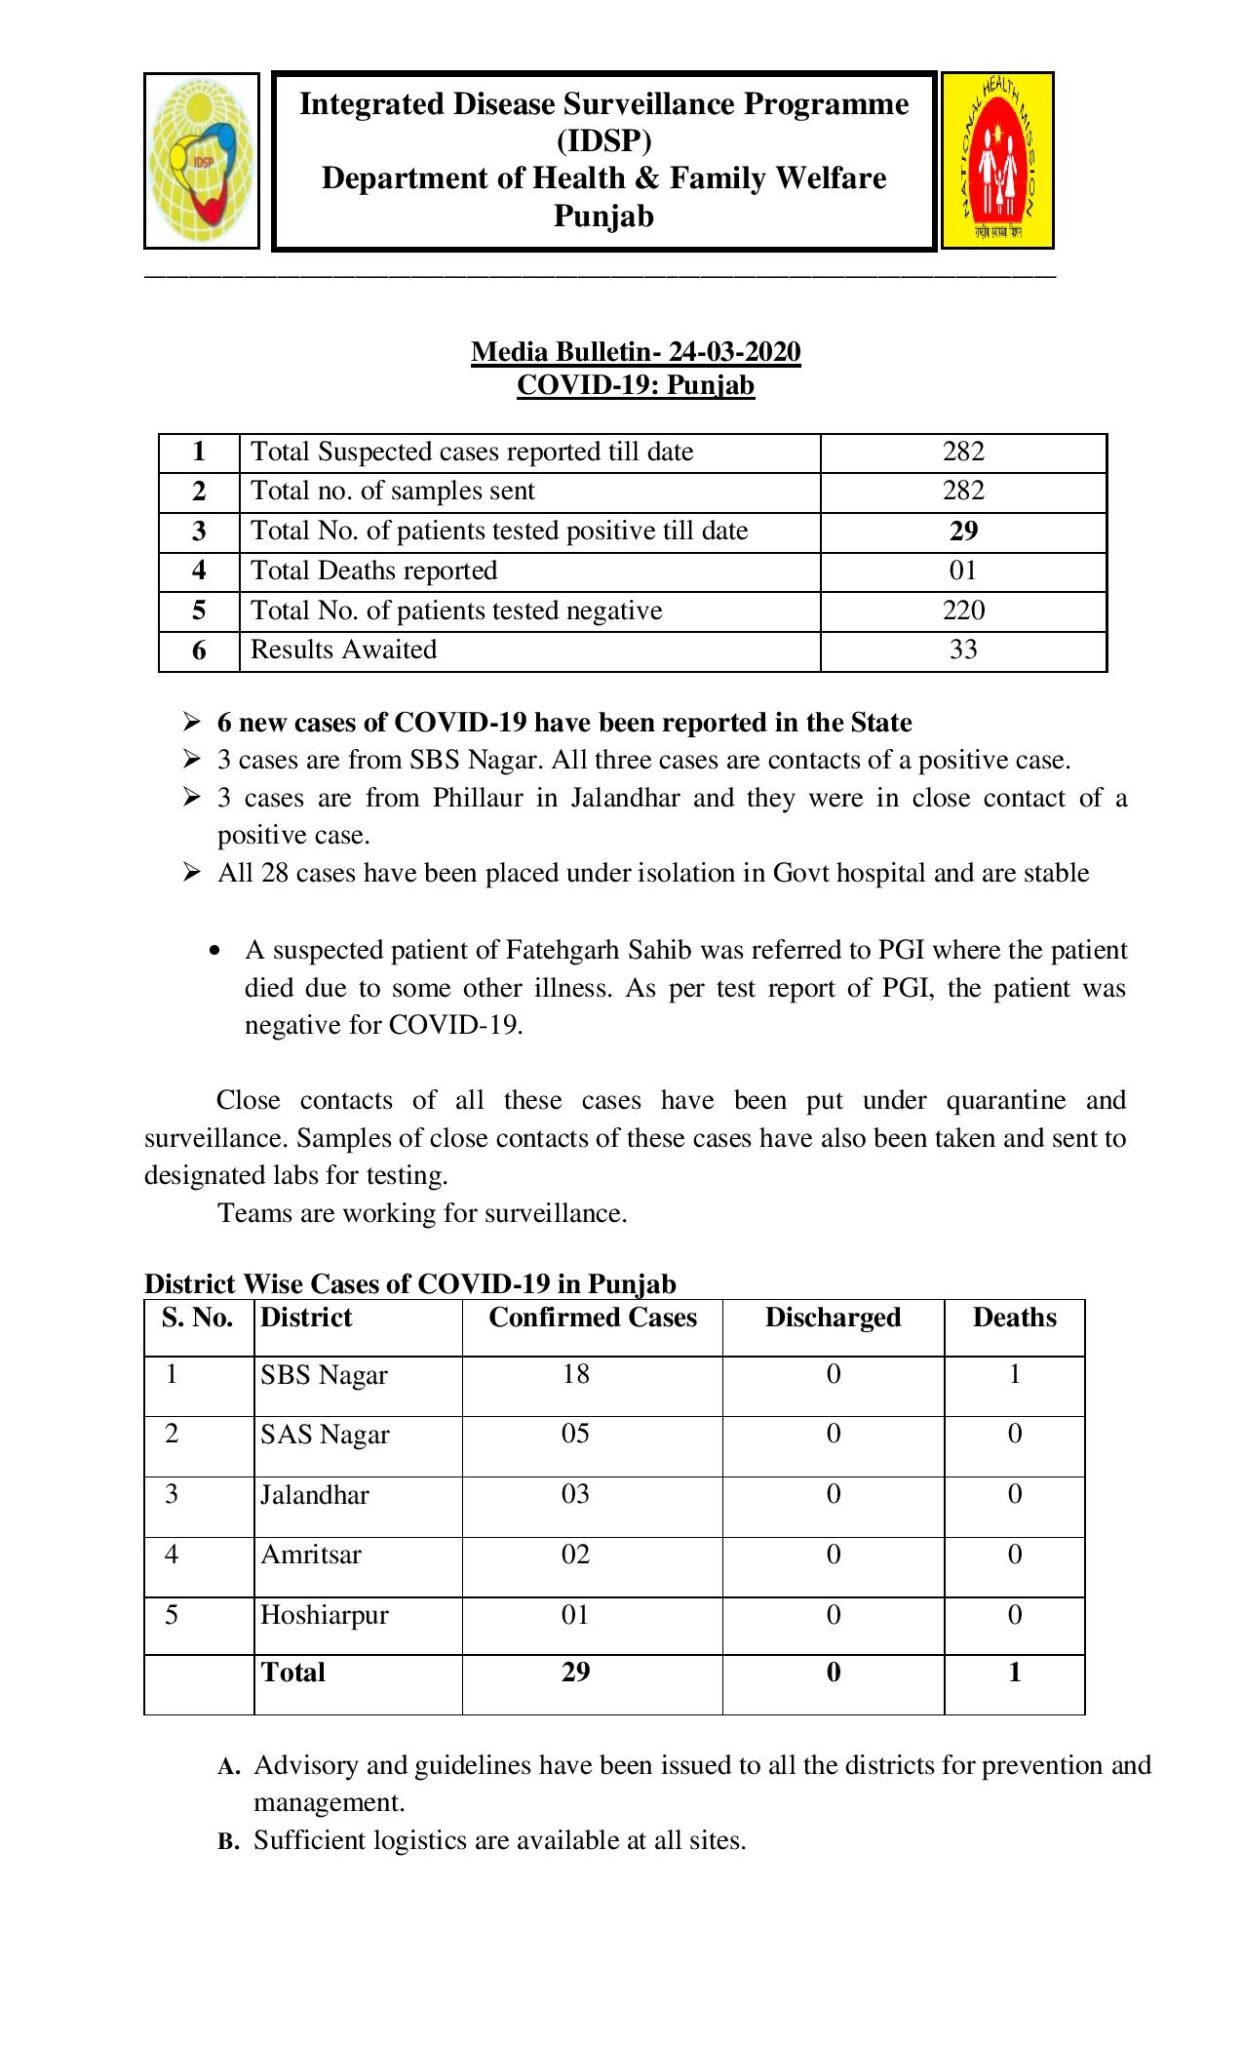 Covid-19 update-3 new cases from Phillaur; 28 placed in isolation; confirmed 29